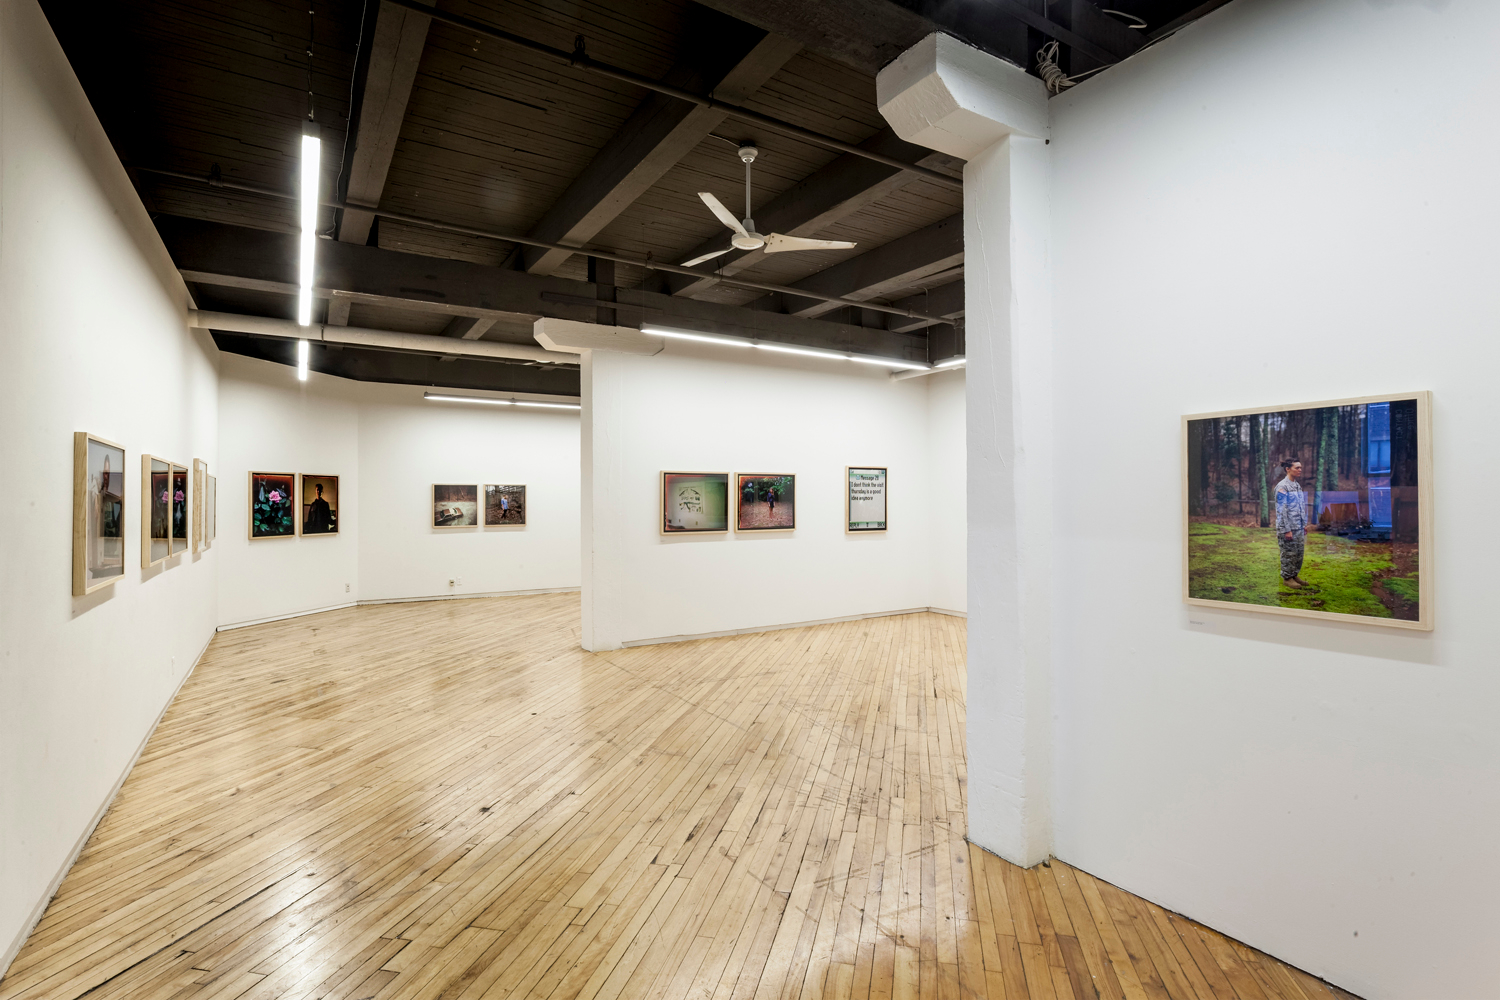     Installation view of Guillaume Simoneau, Love and War, Photo: Toni Hafkenscheid

